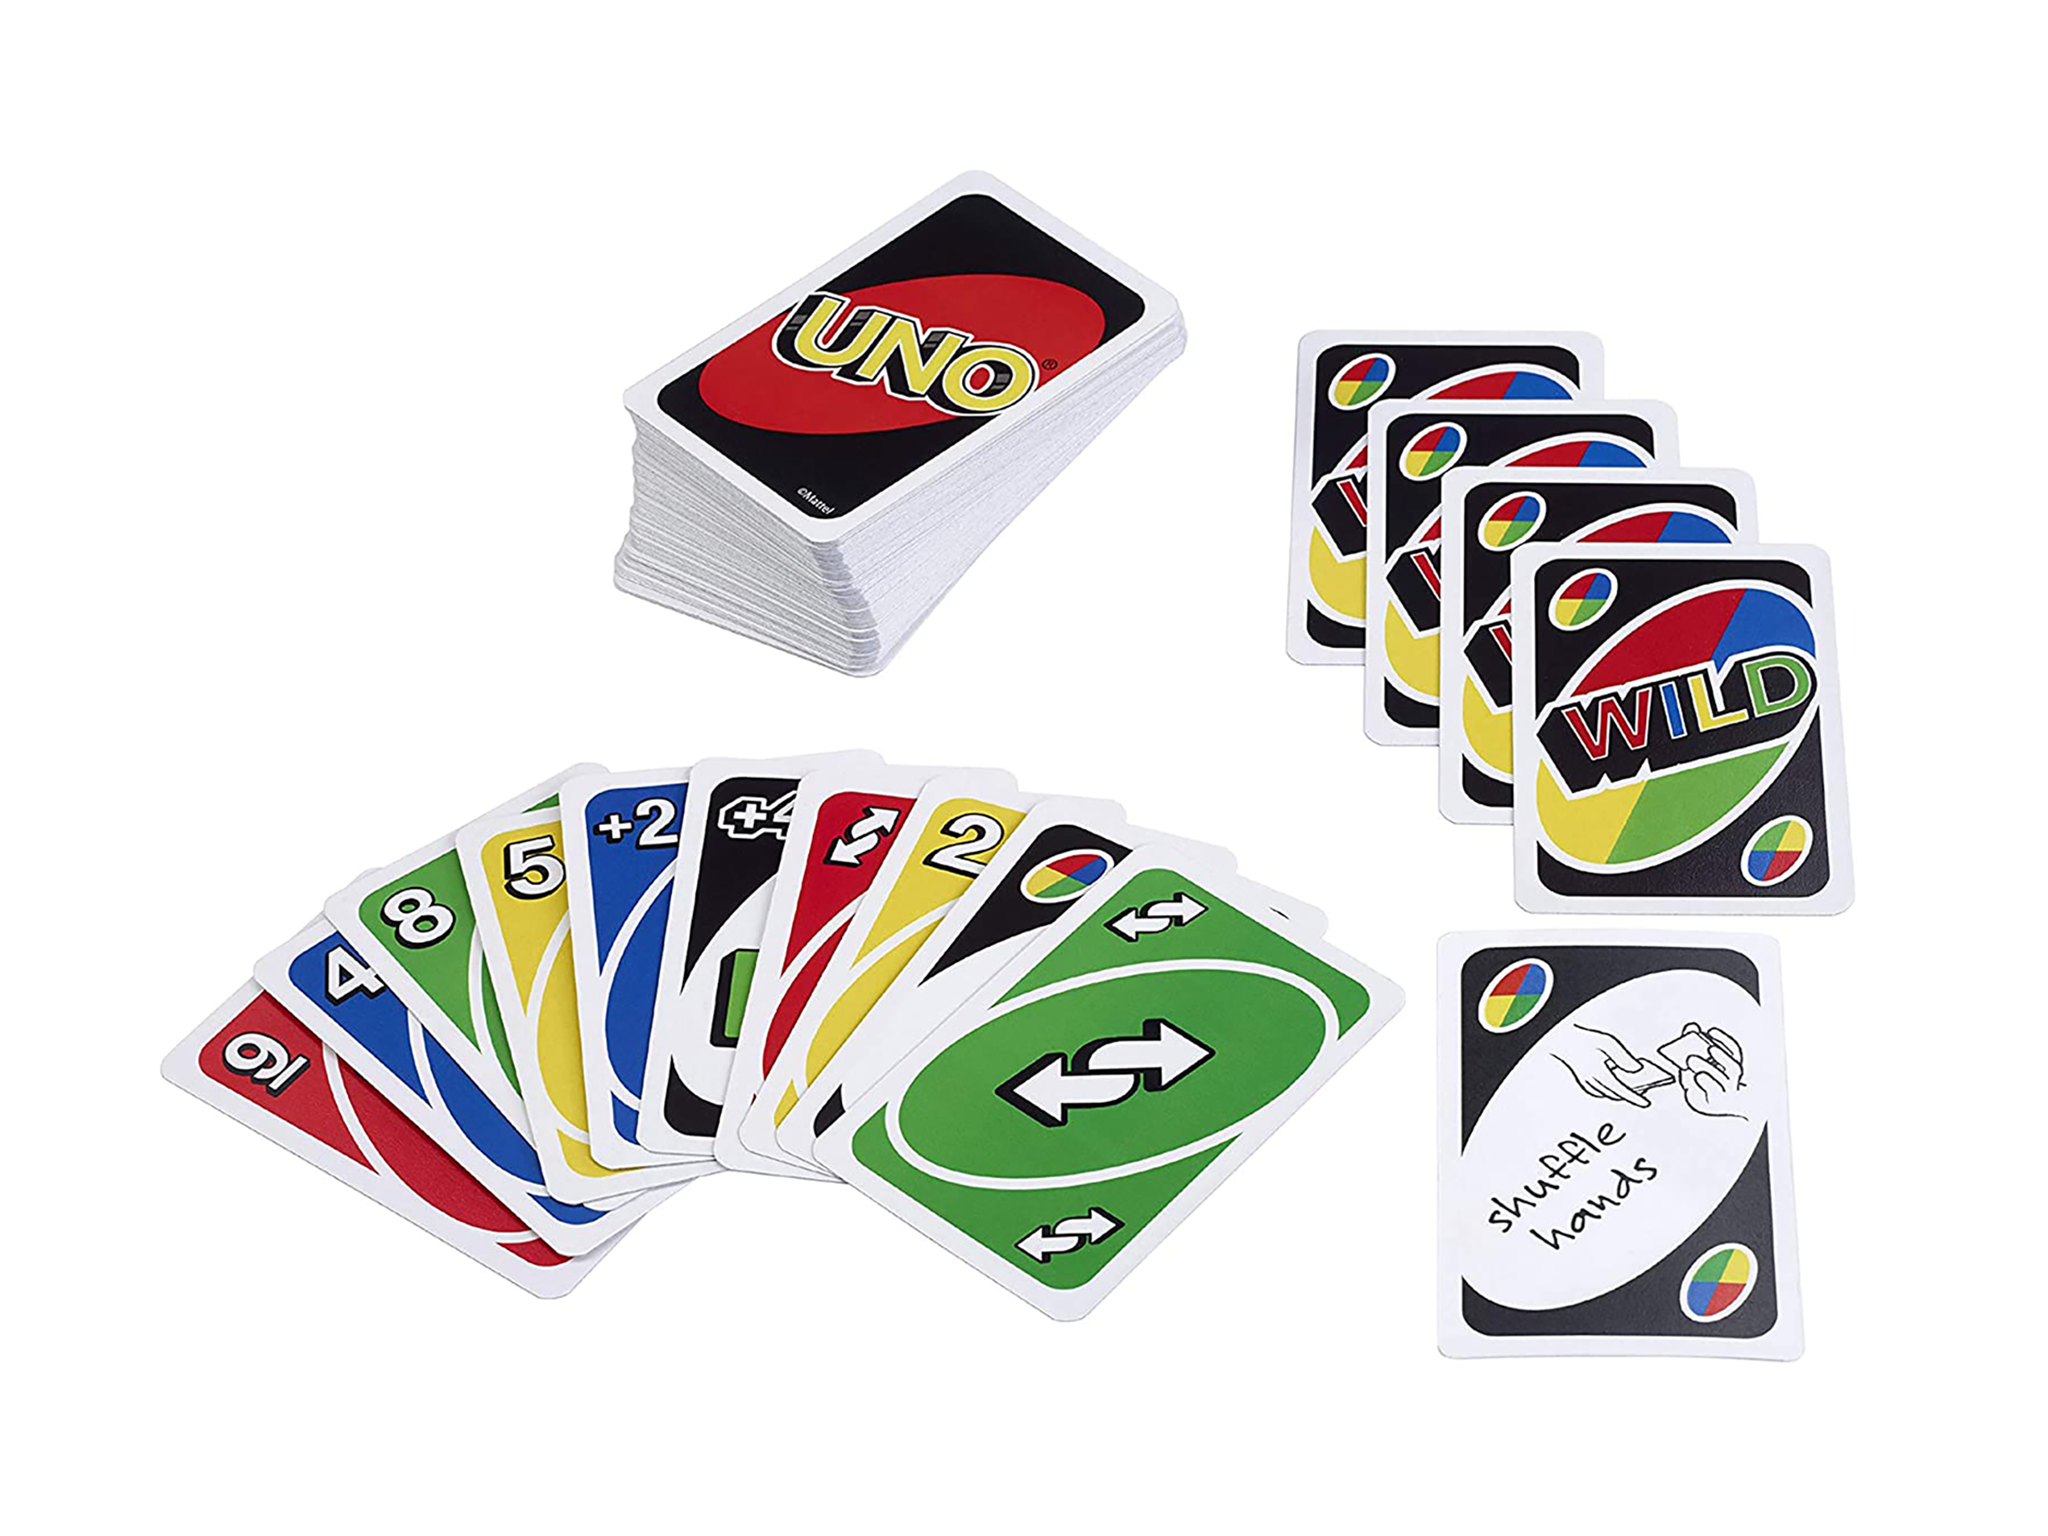 Uno.png